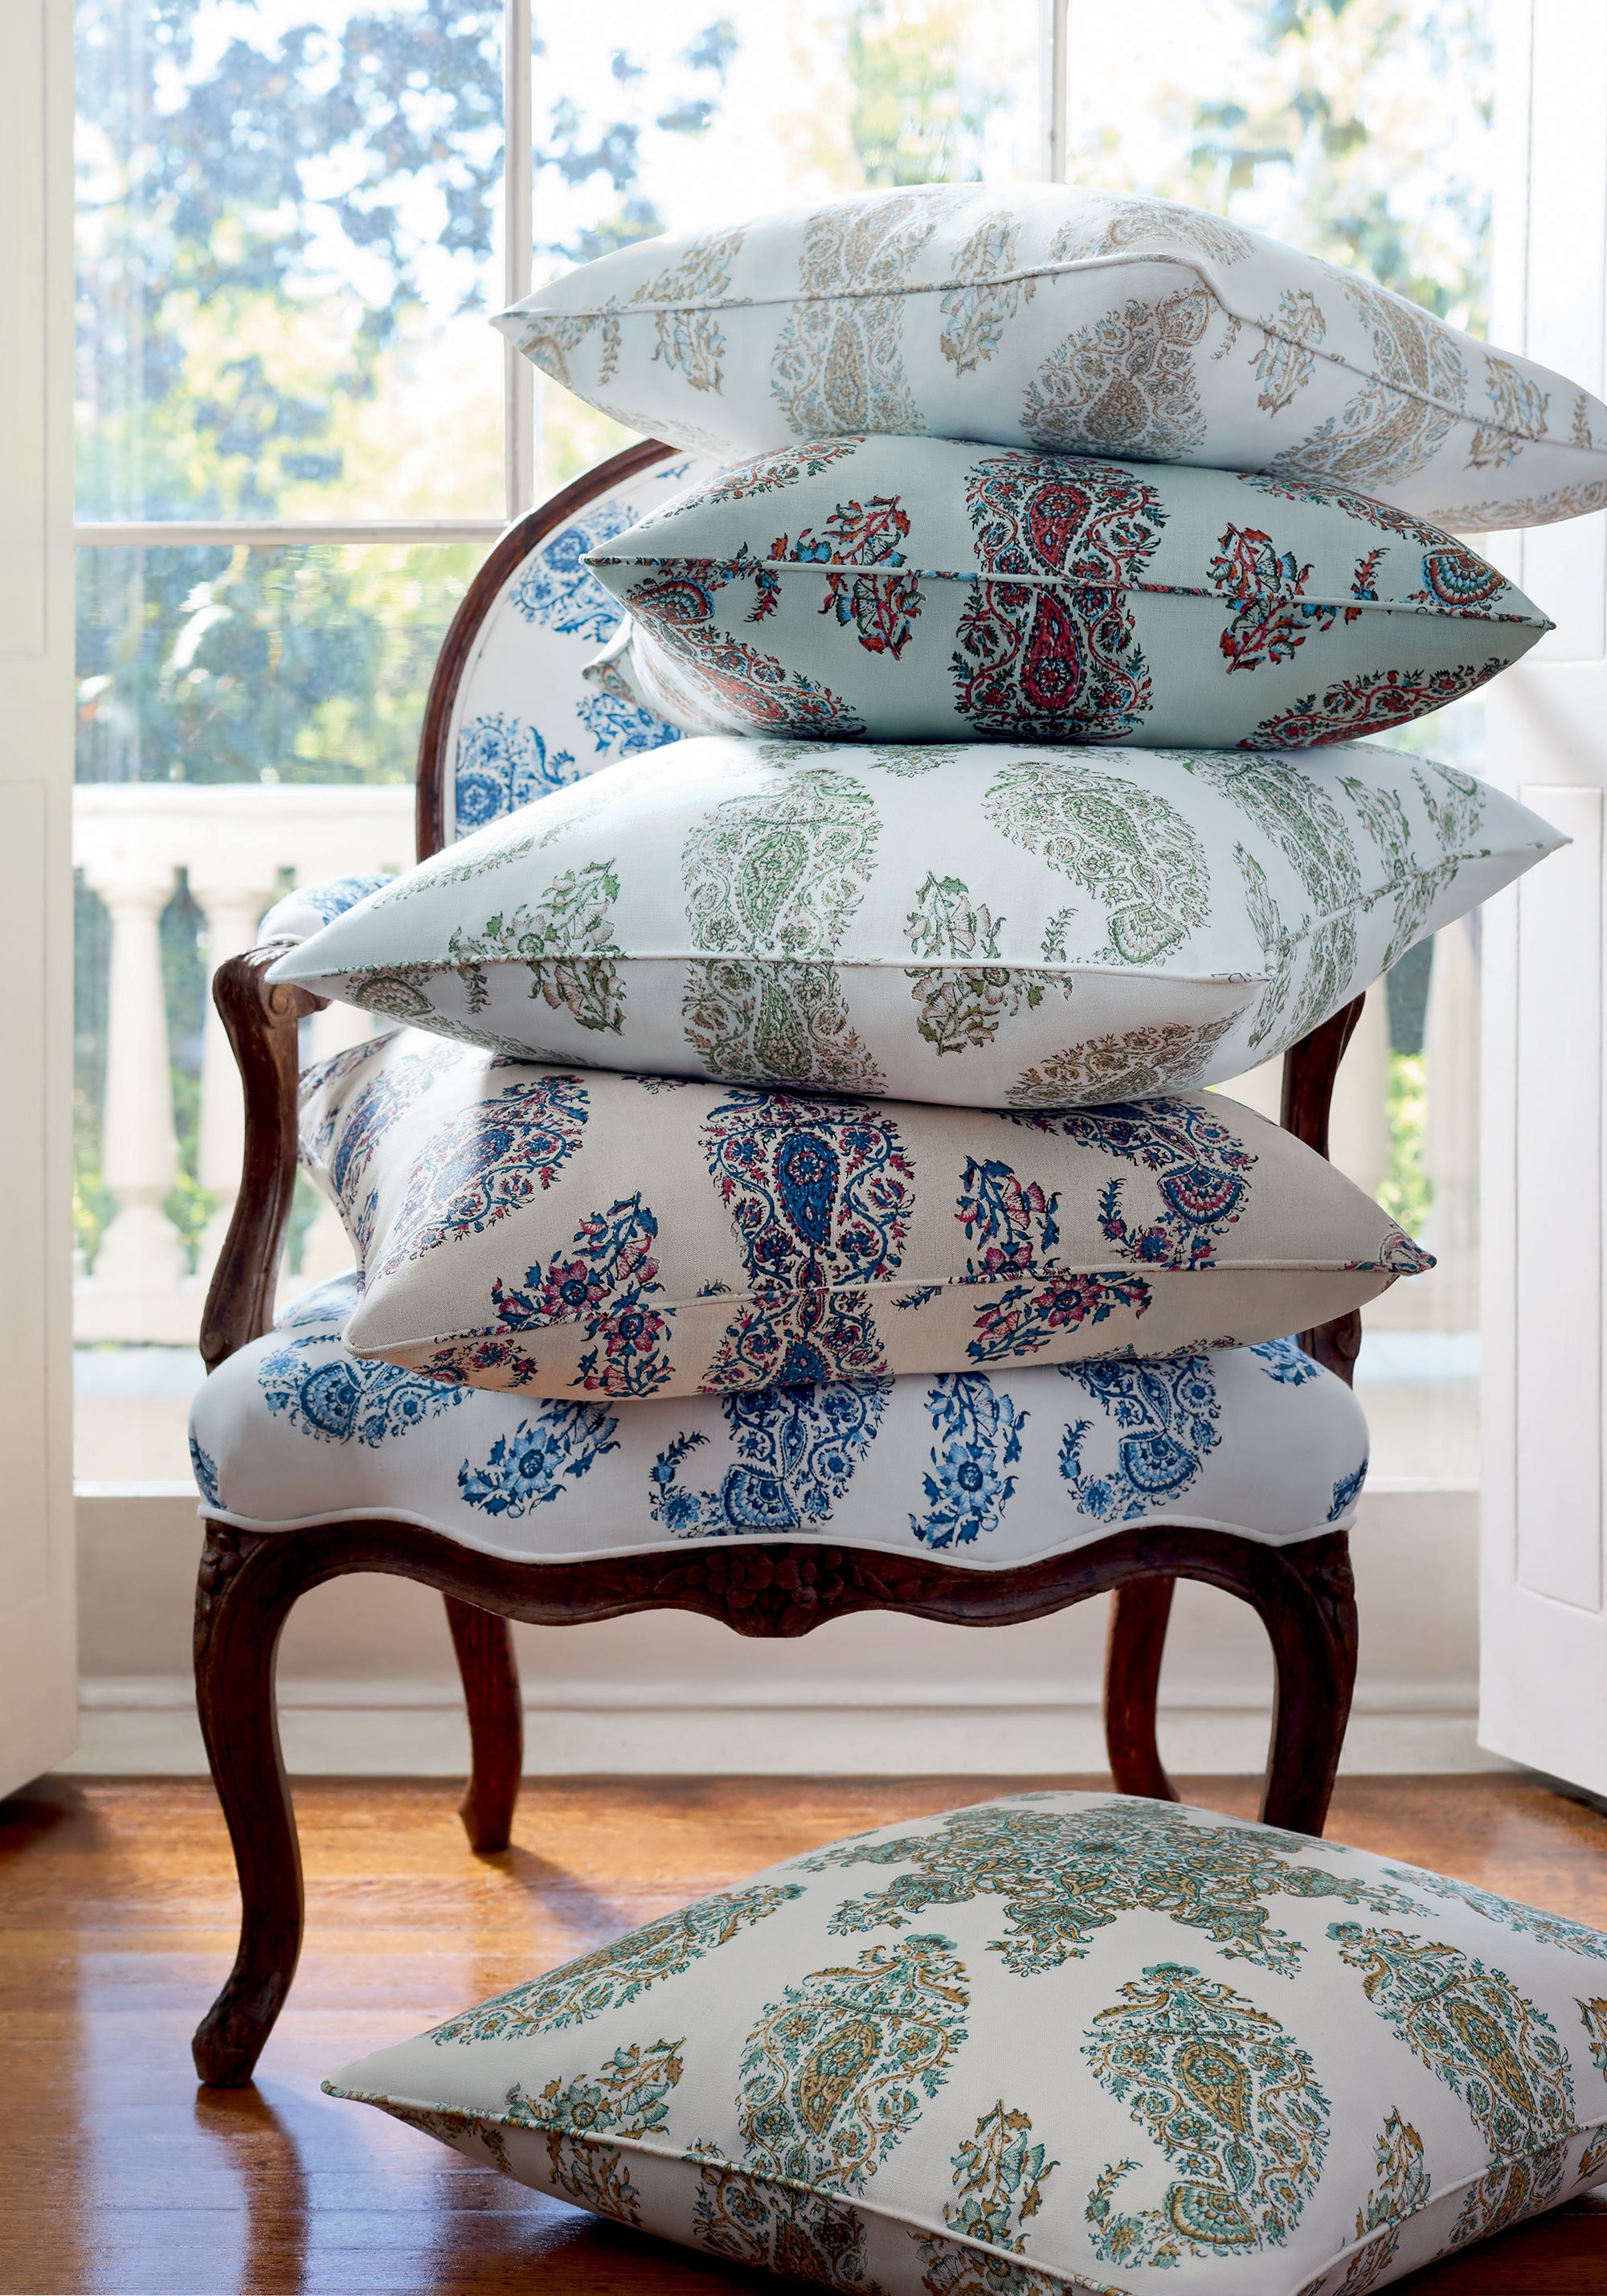 Pillow featuring East India fabric in seaglass color - pattern number F936428 - by Thibaut in the Indienne collection